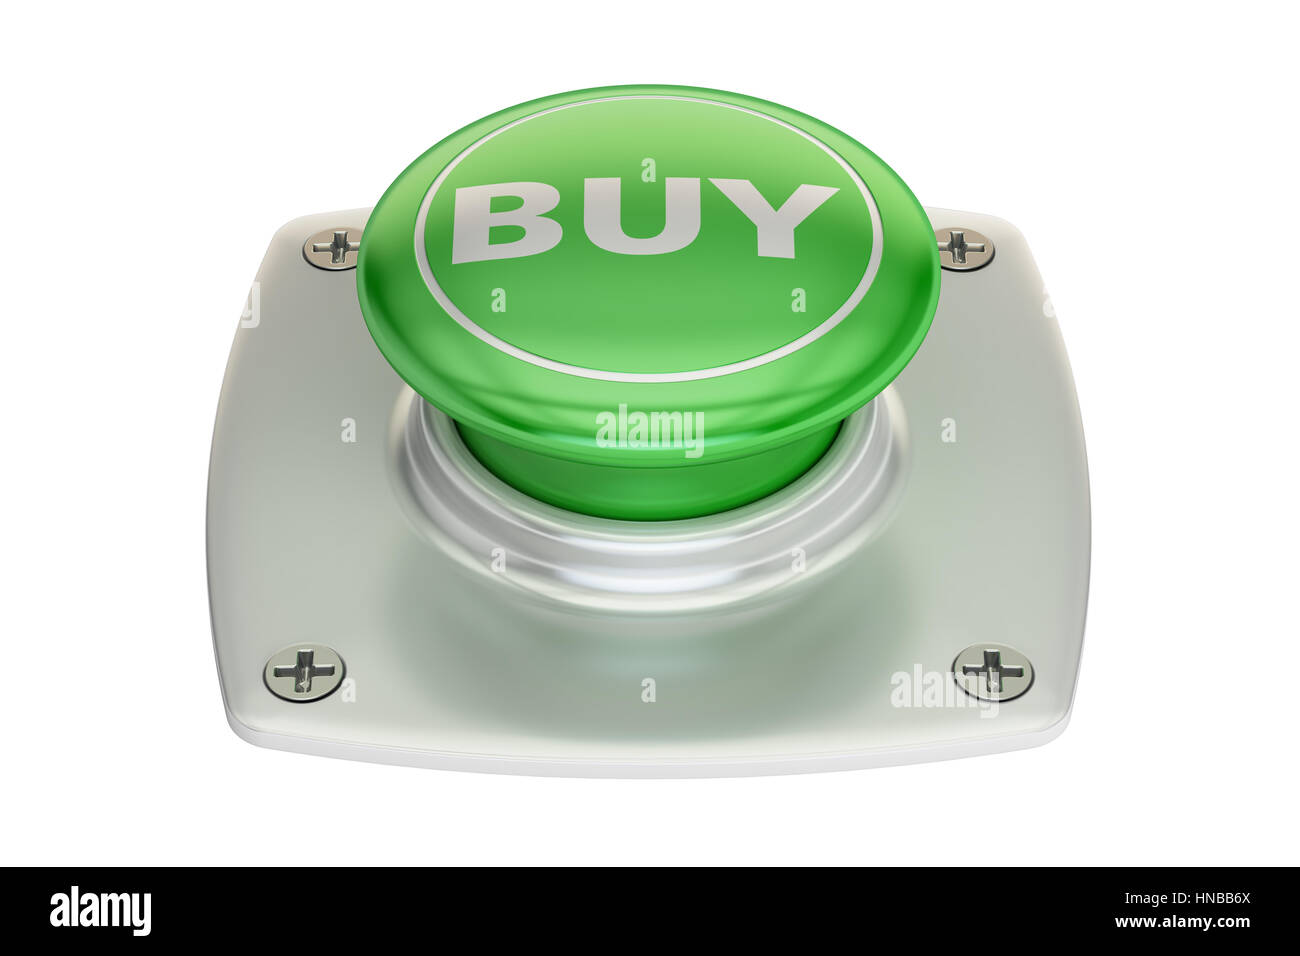 Buy green button, 3D rendering isolated on white background Stock Photo